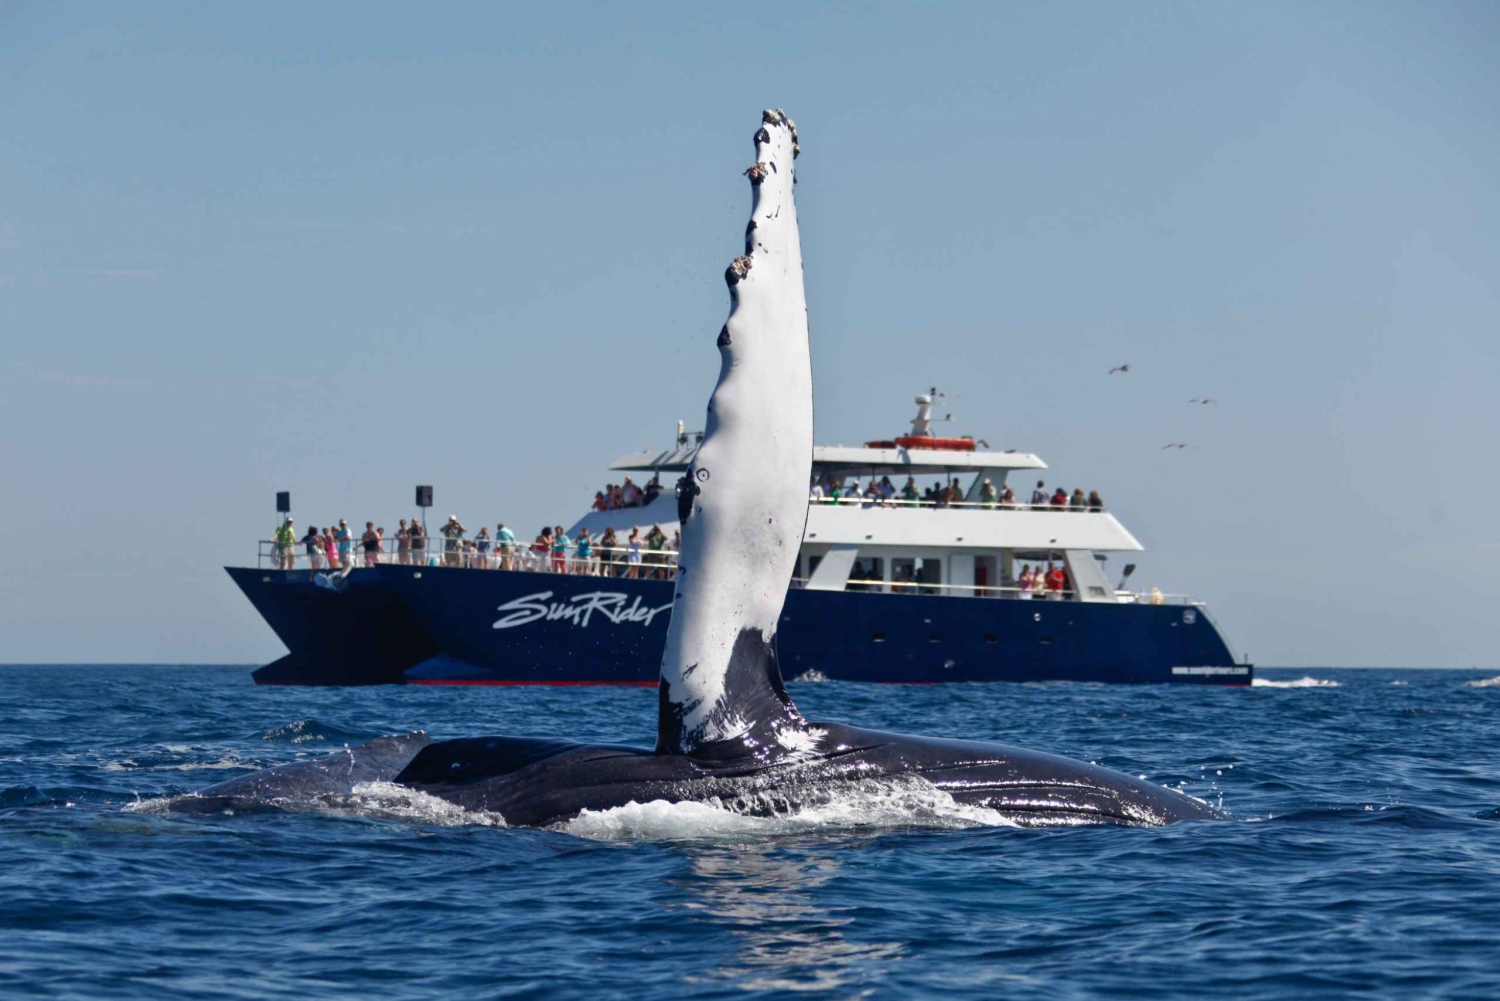 Cabo San Lucas: SunRider Whale Watching Tour with Buffet